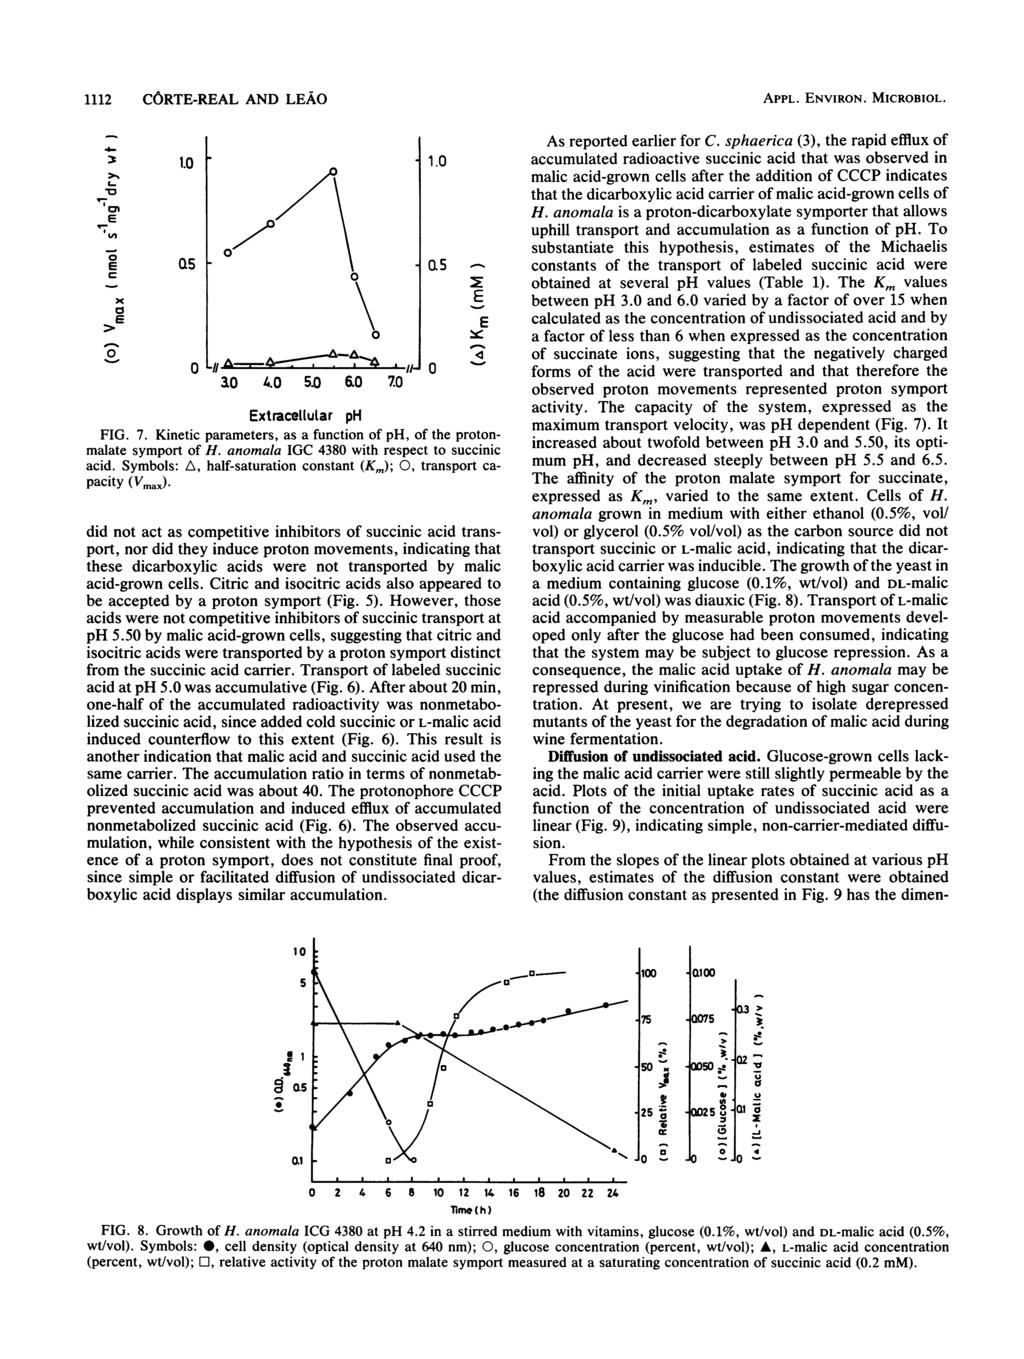 1112 CORT-RAL AND LAO - 'rn L- U- a x 1. r Q5.--. 5.. 7. 3w 4. 5. & 7. xtracellular ph FIG. 7. Kinetic parameters, as a function of ph, of the protonmalate symport of H.